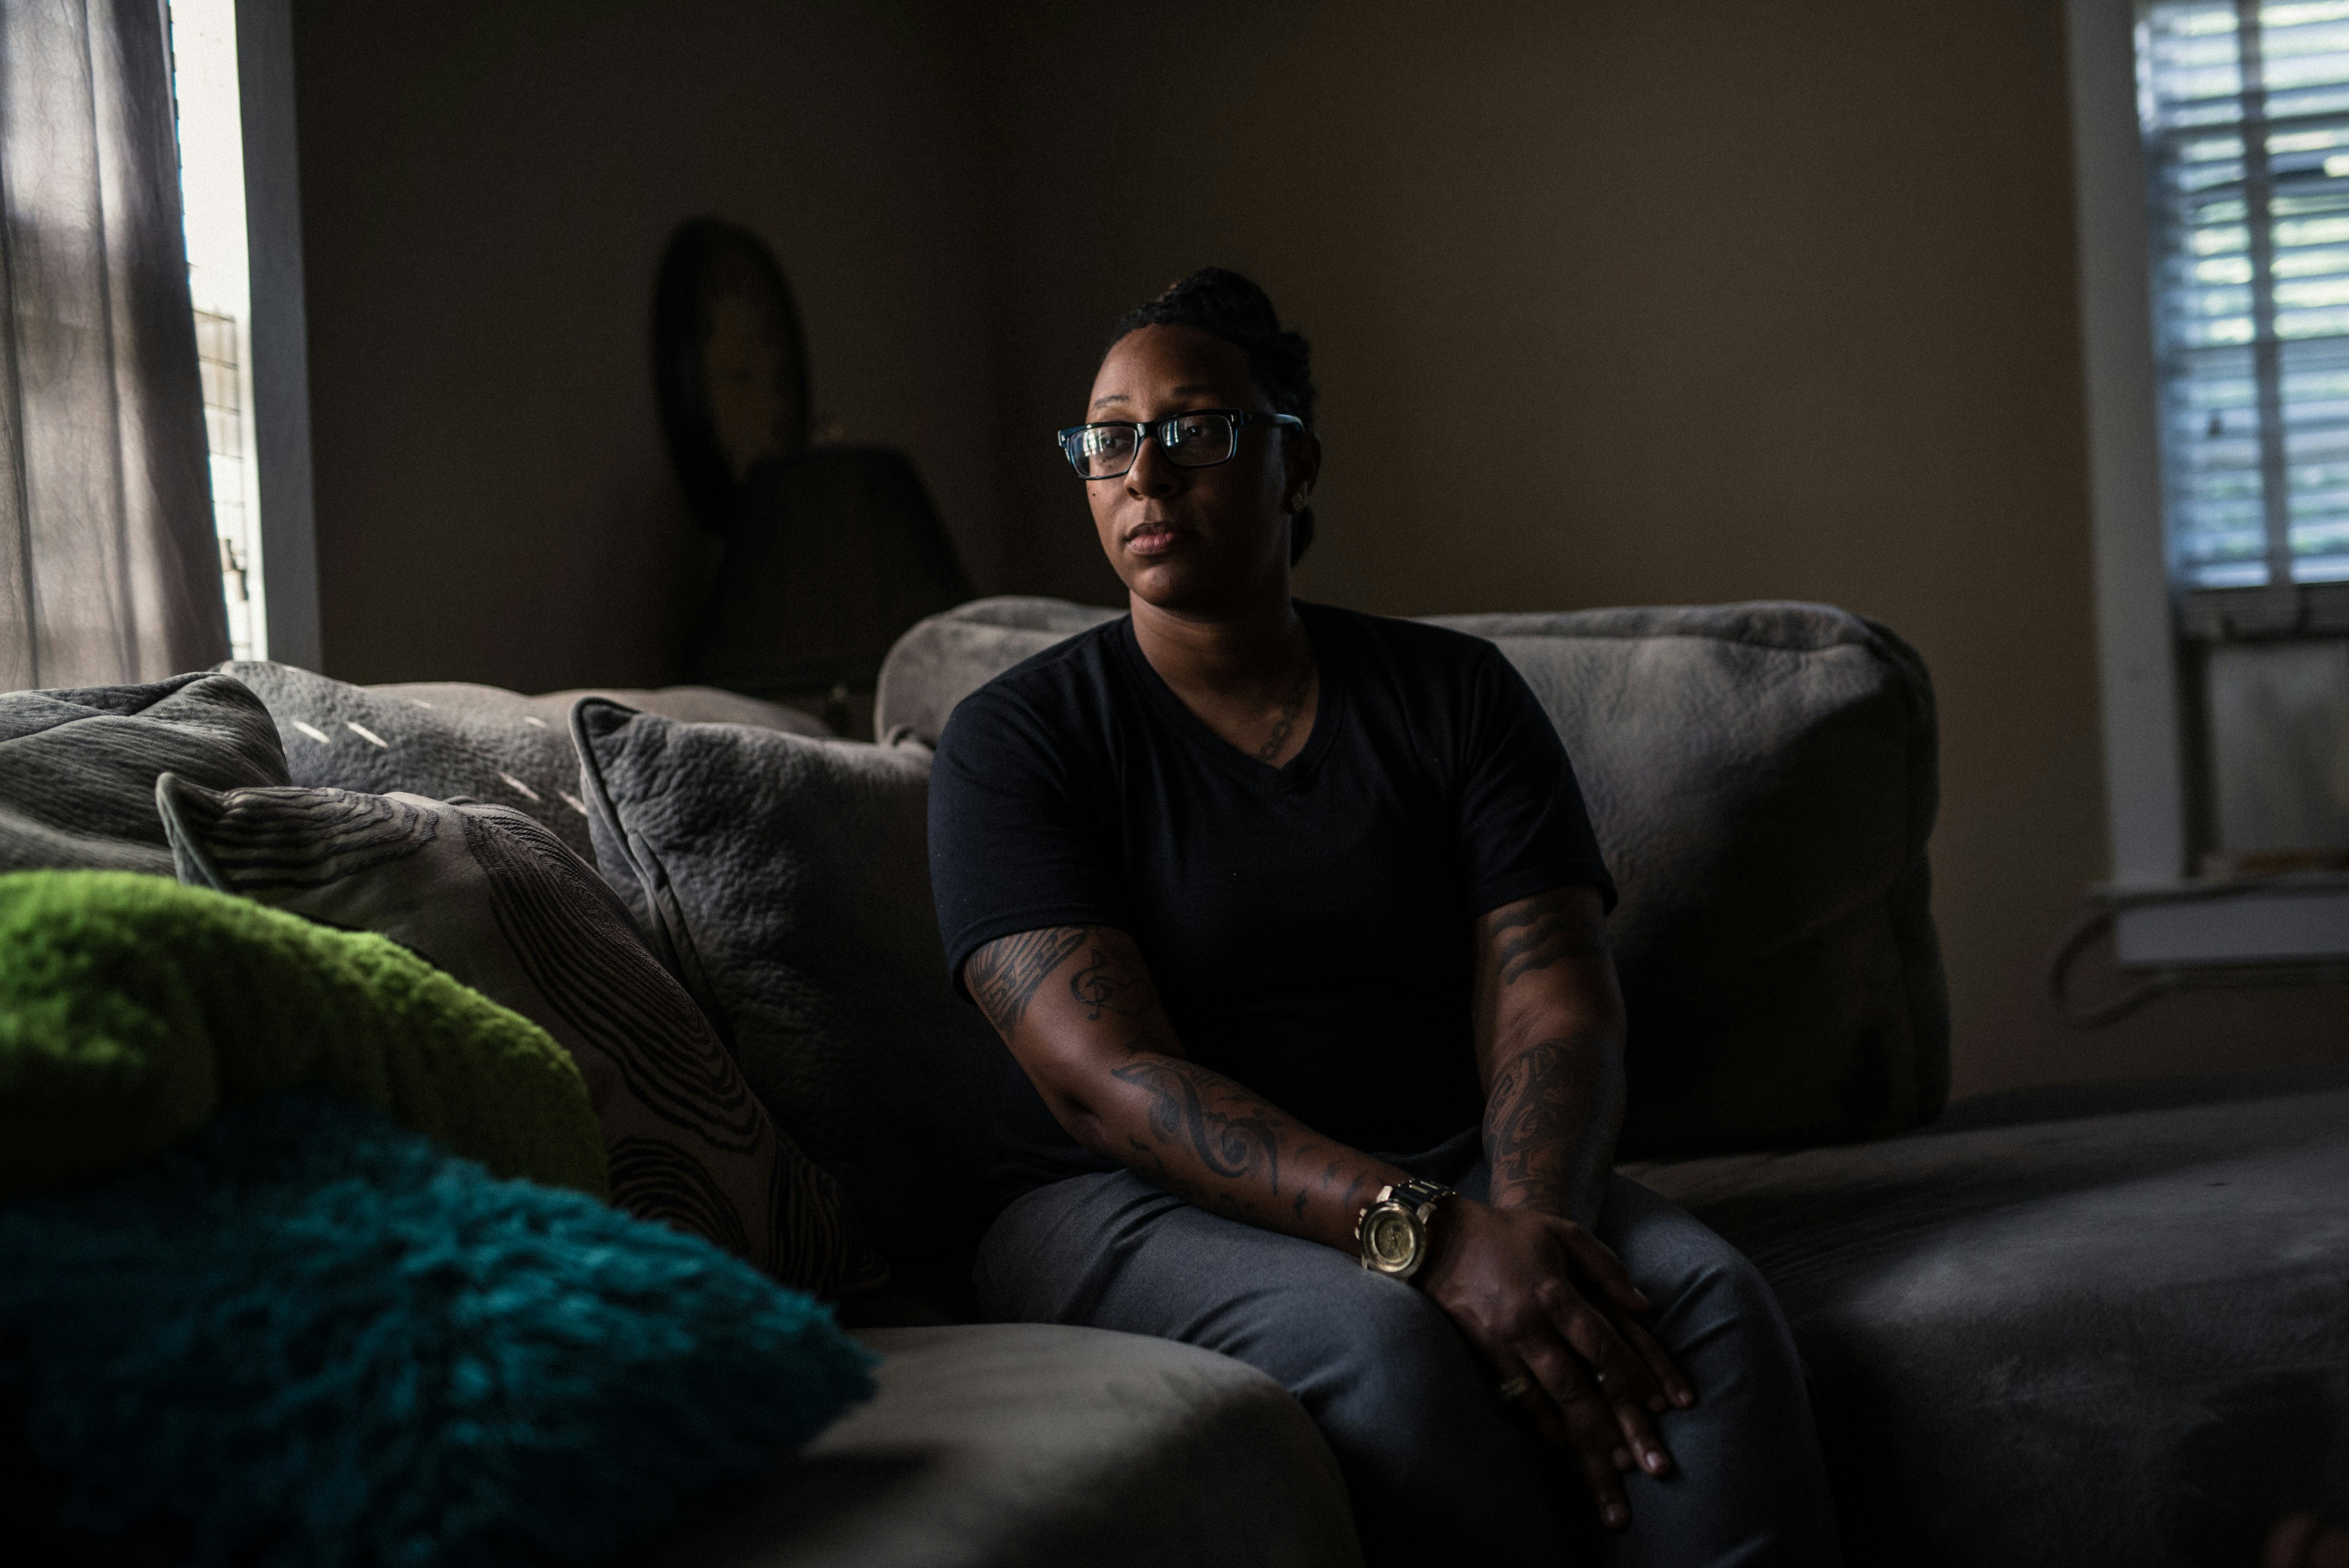 Marquetta Thomas at her home in Baldwin, GA. in 1998, Mrs. Thomas told investigators that Devonia Inman committed a murder at the Taco Bell in Adel, GA, but then recanted at trial.